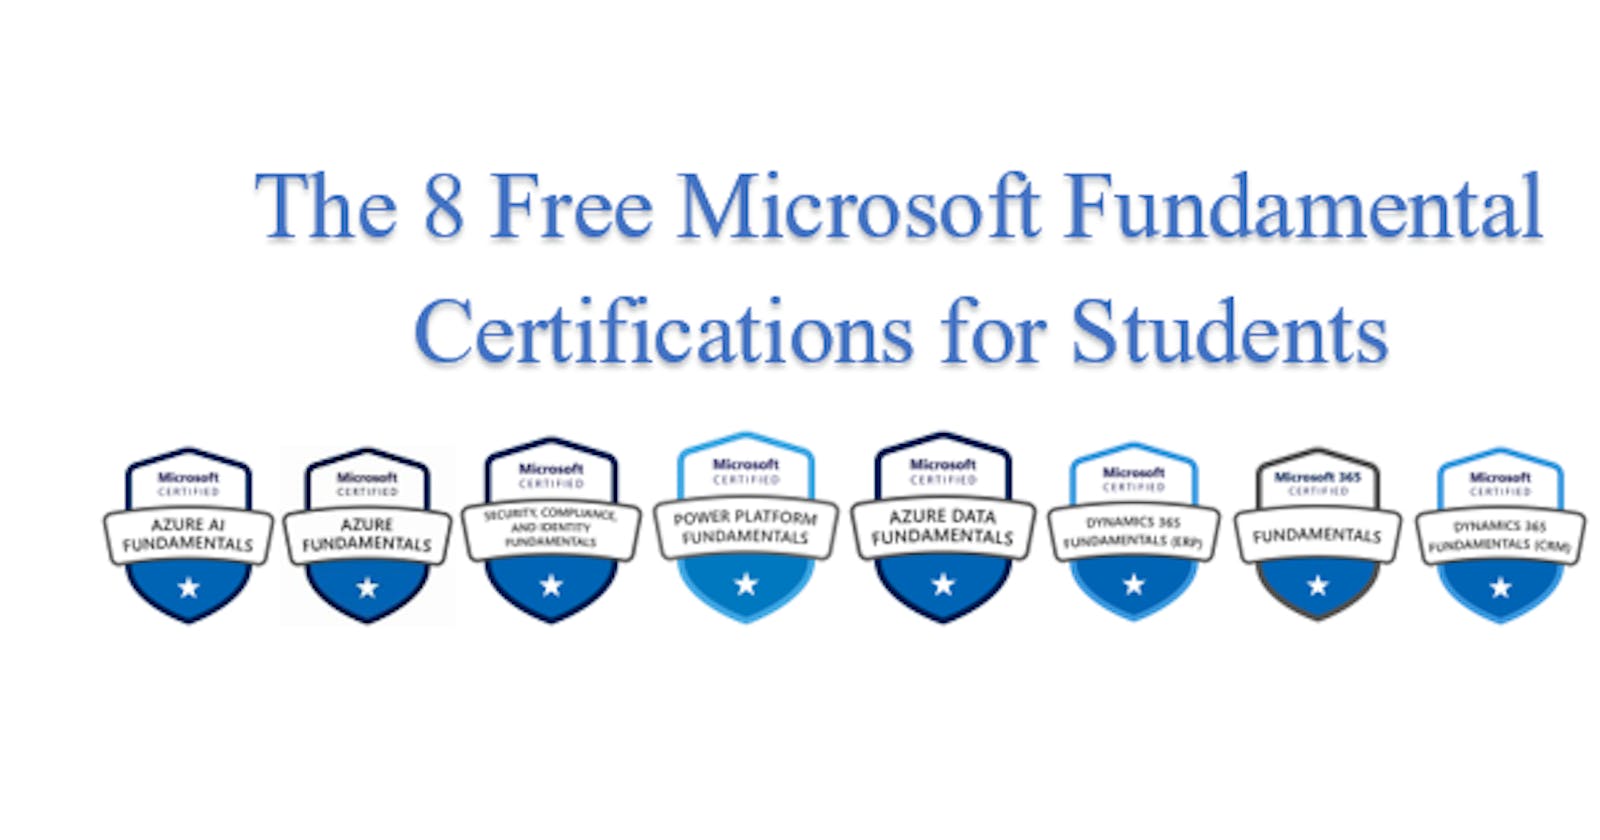 The 8 Free Microsoft Fundamental certifications for students